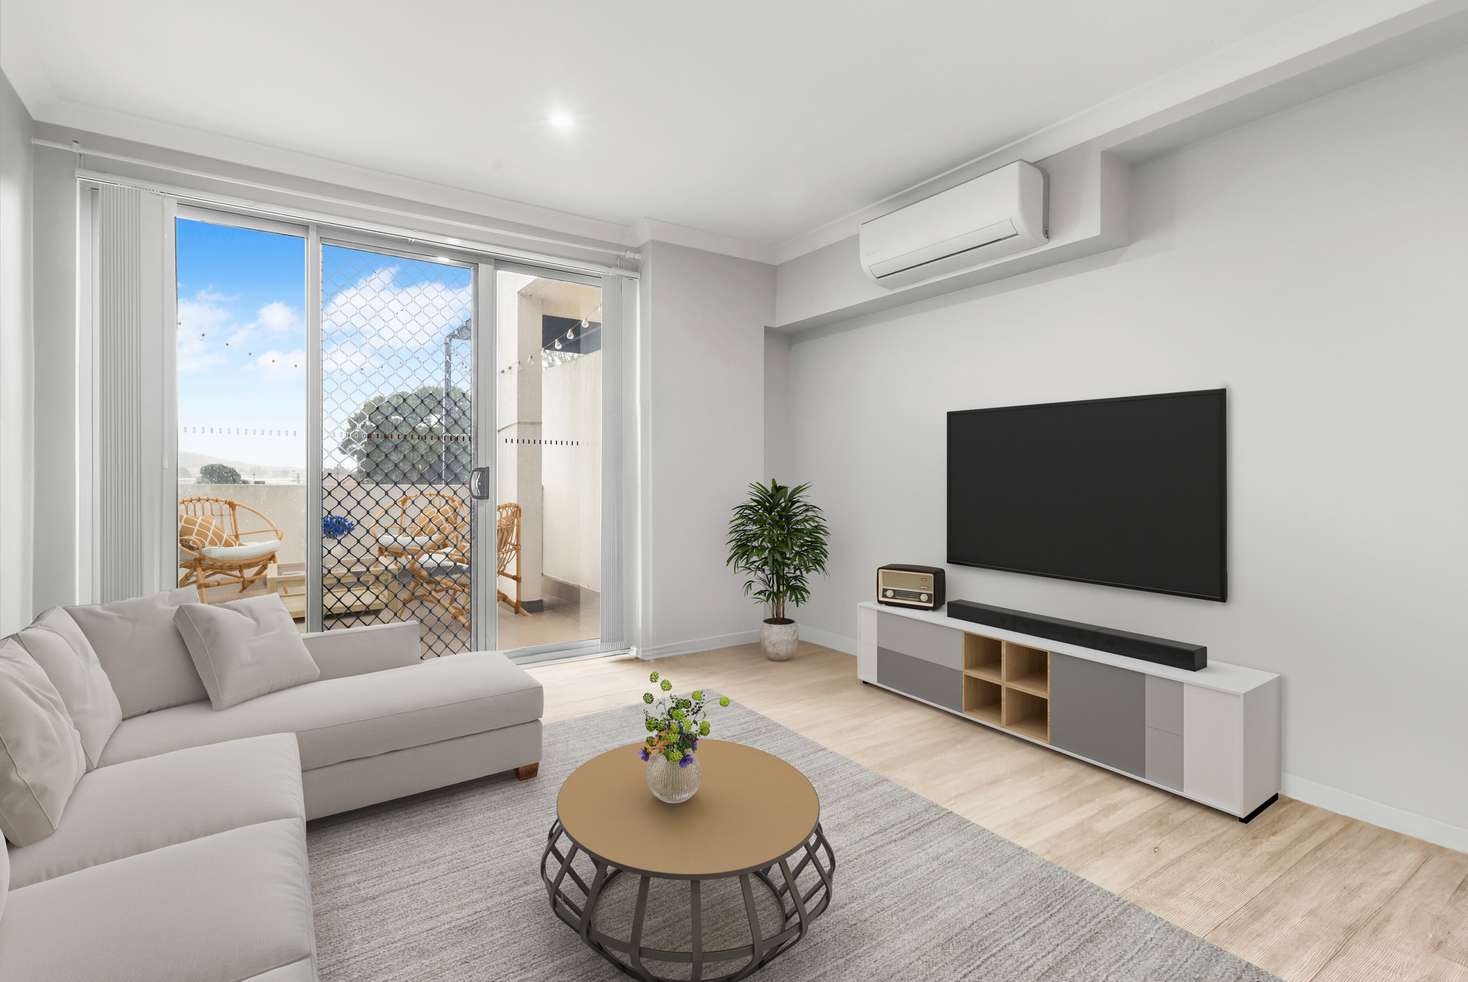 Main view of Homely apartment listing, 107/101 Best Road, Seven Hills NSW 2147